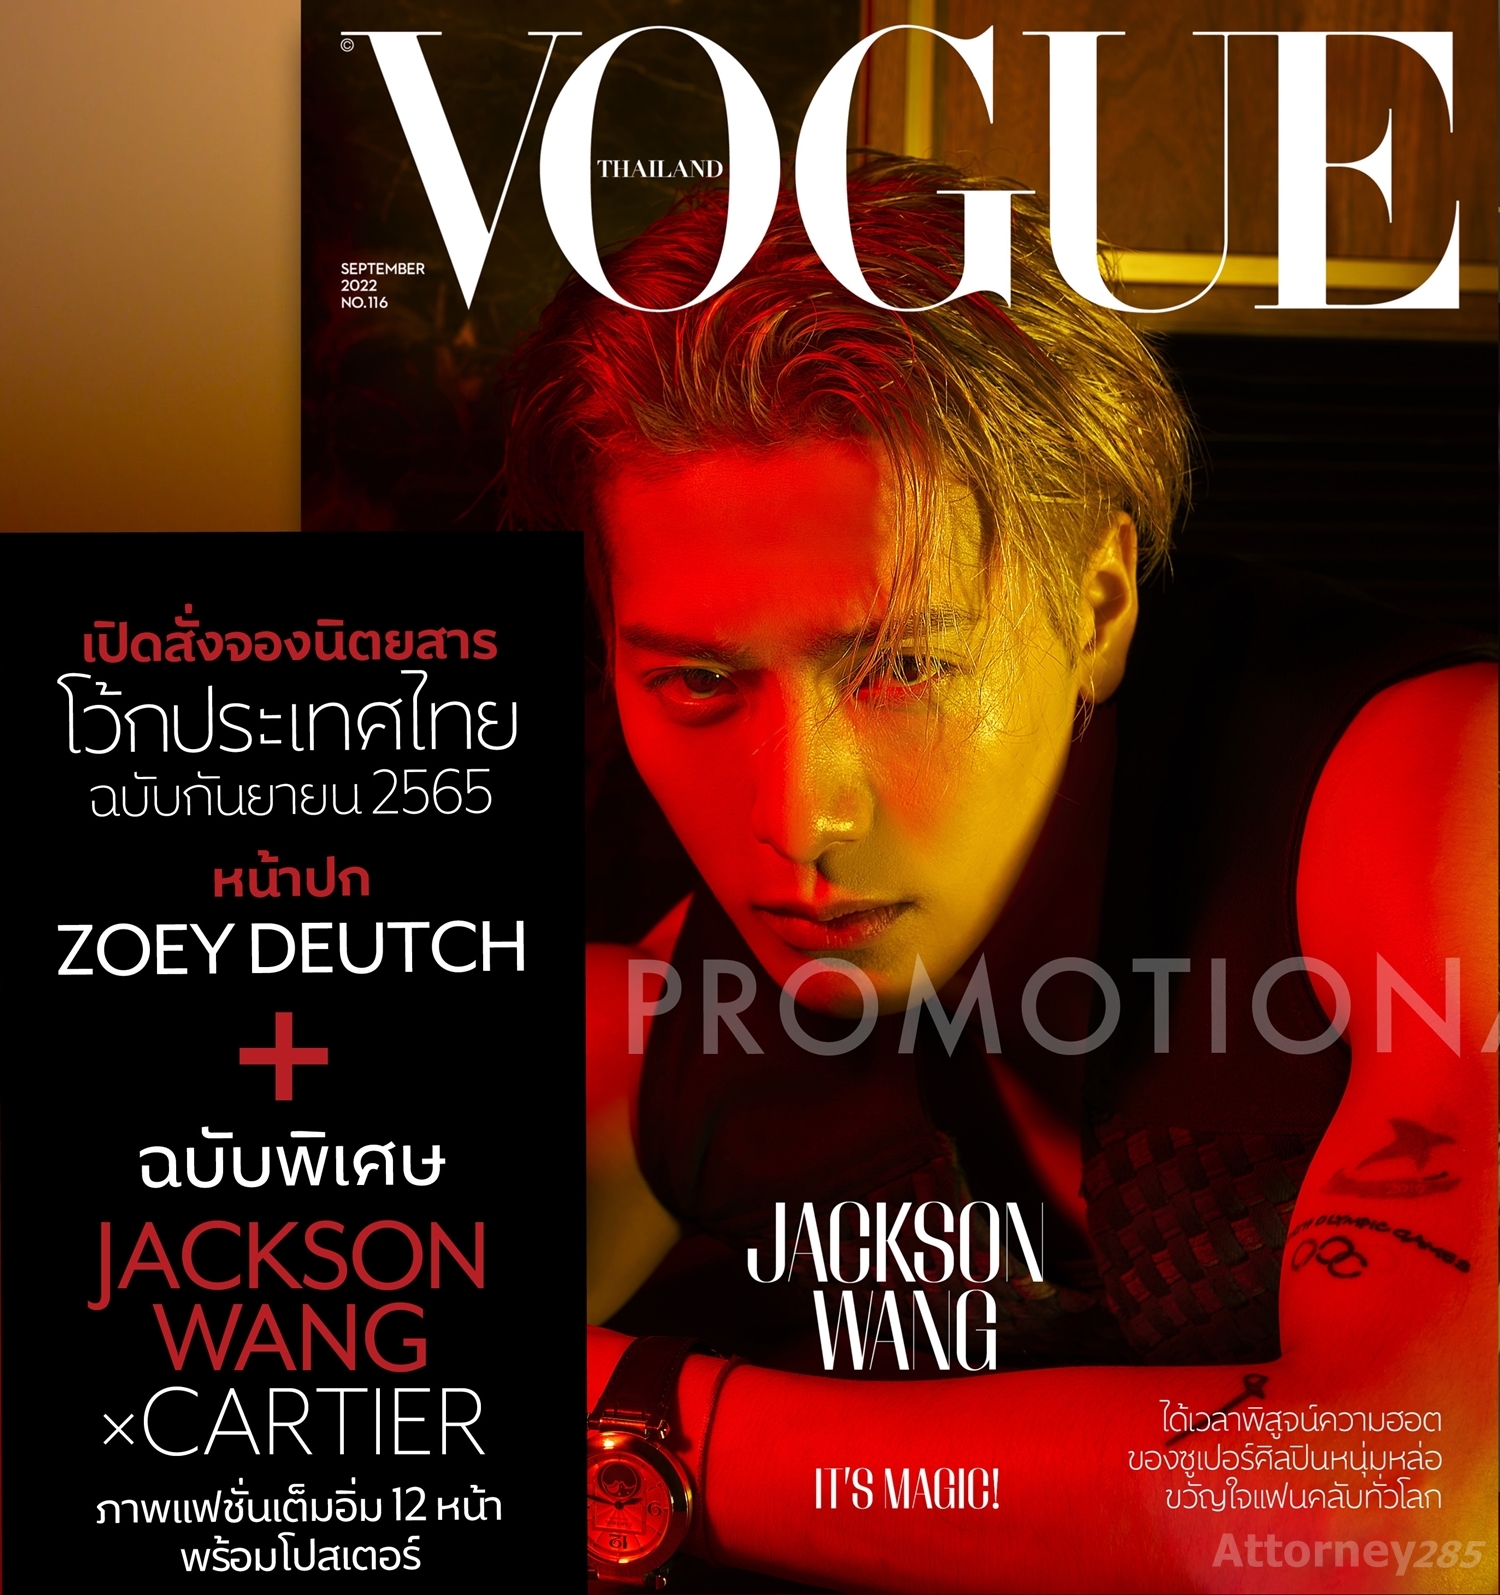 Jackson Wang Stars in Vogue Thailand September 2022 Issue